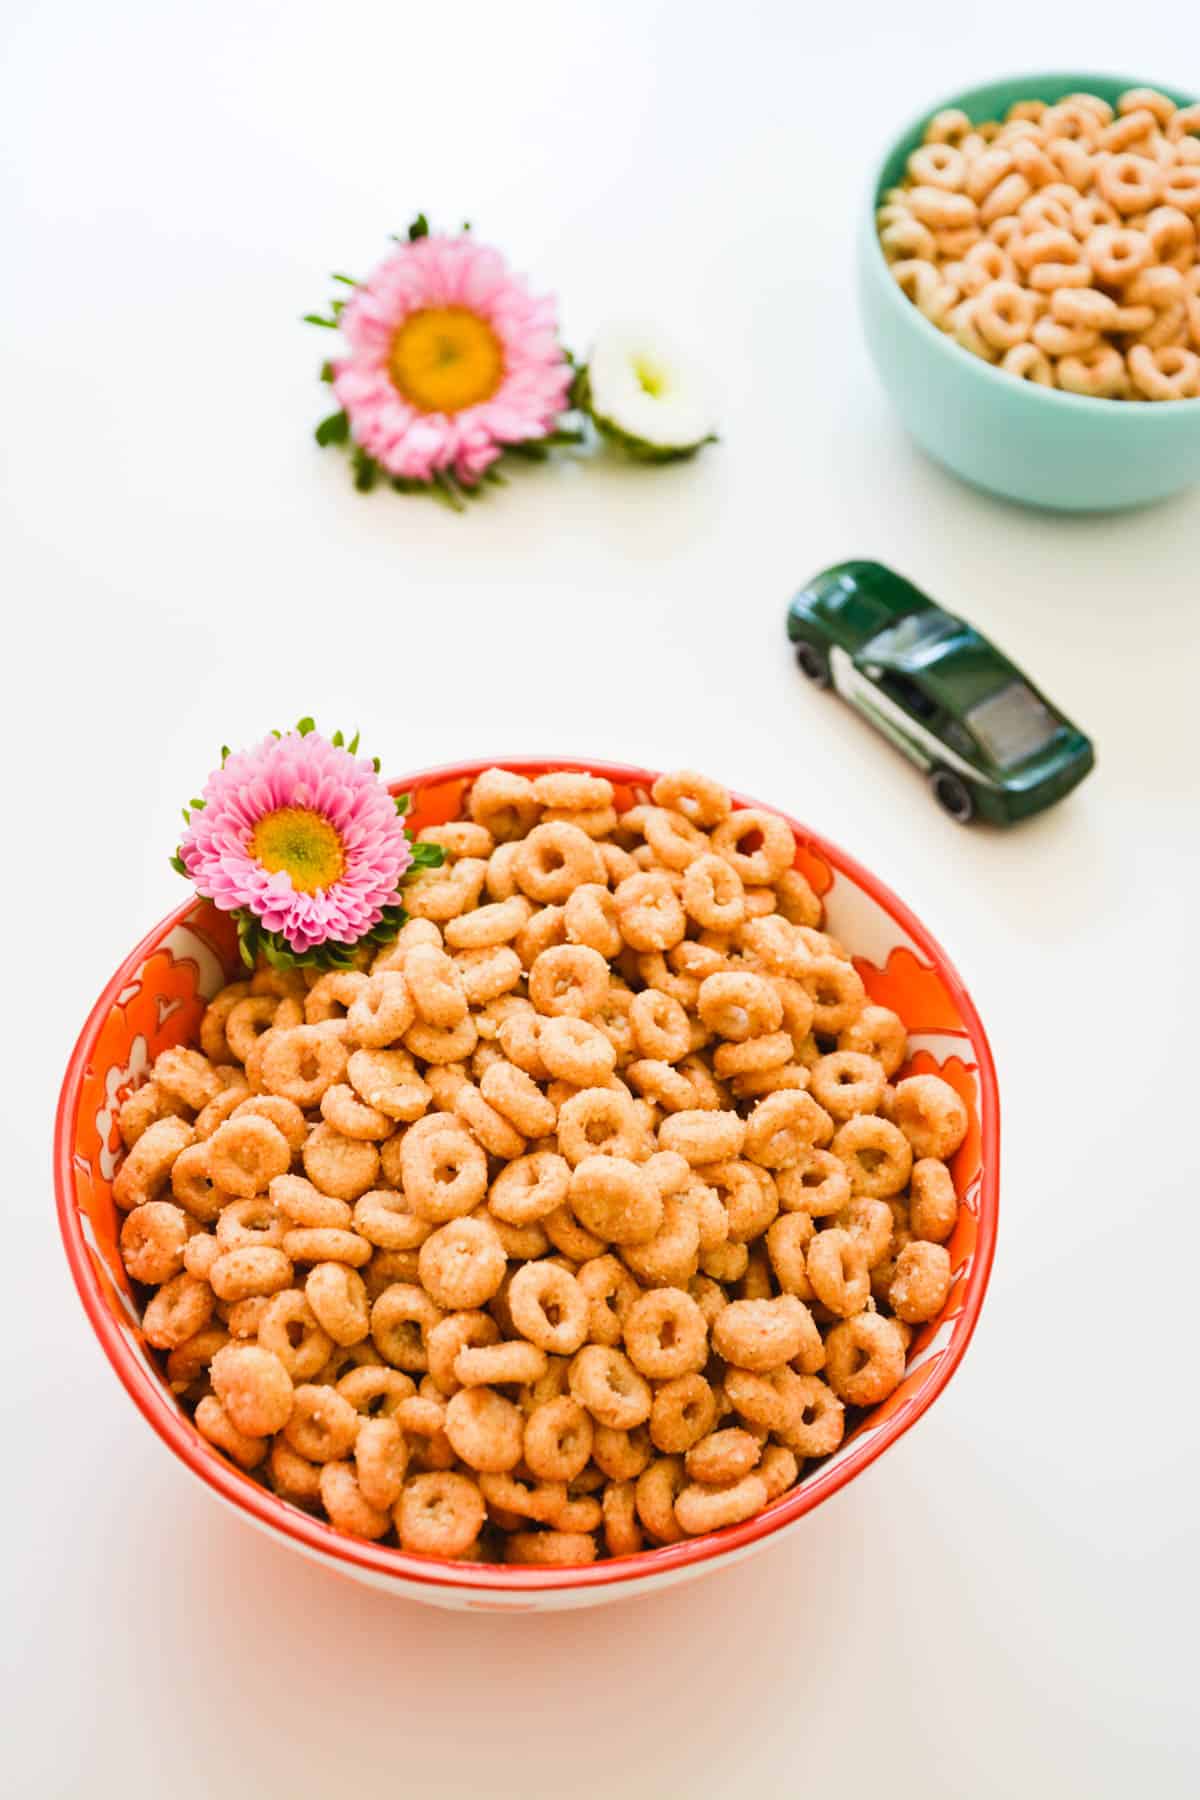 A bowl on a table with Fried Cheerios and a toy car in the background.